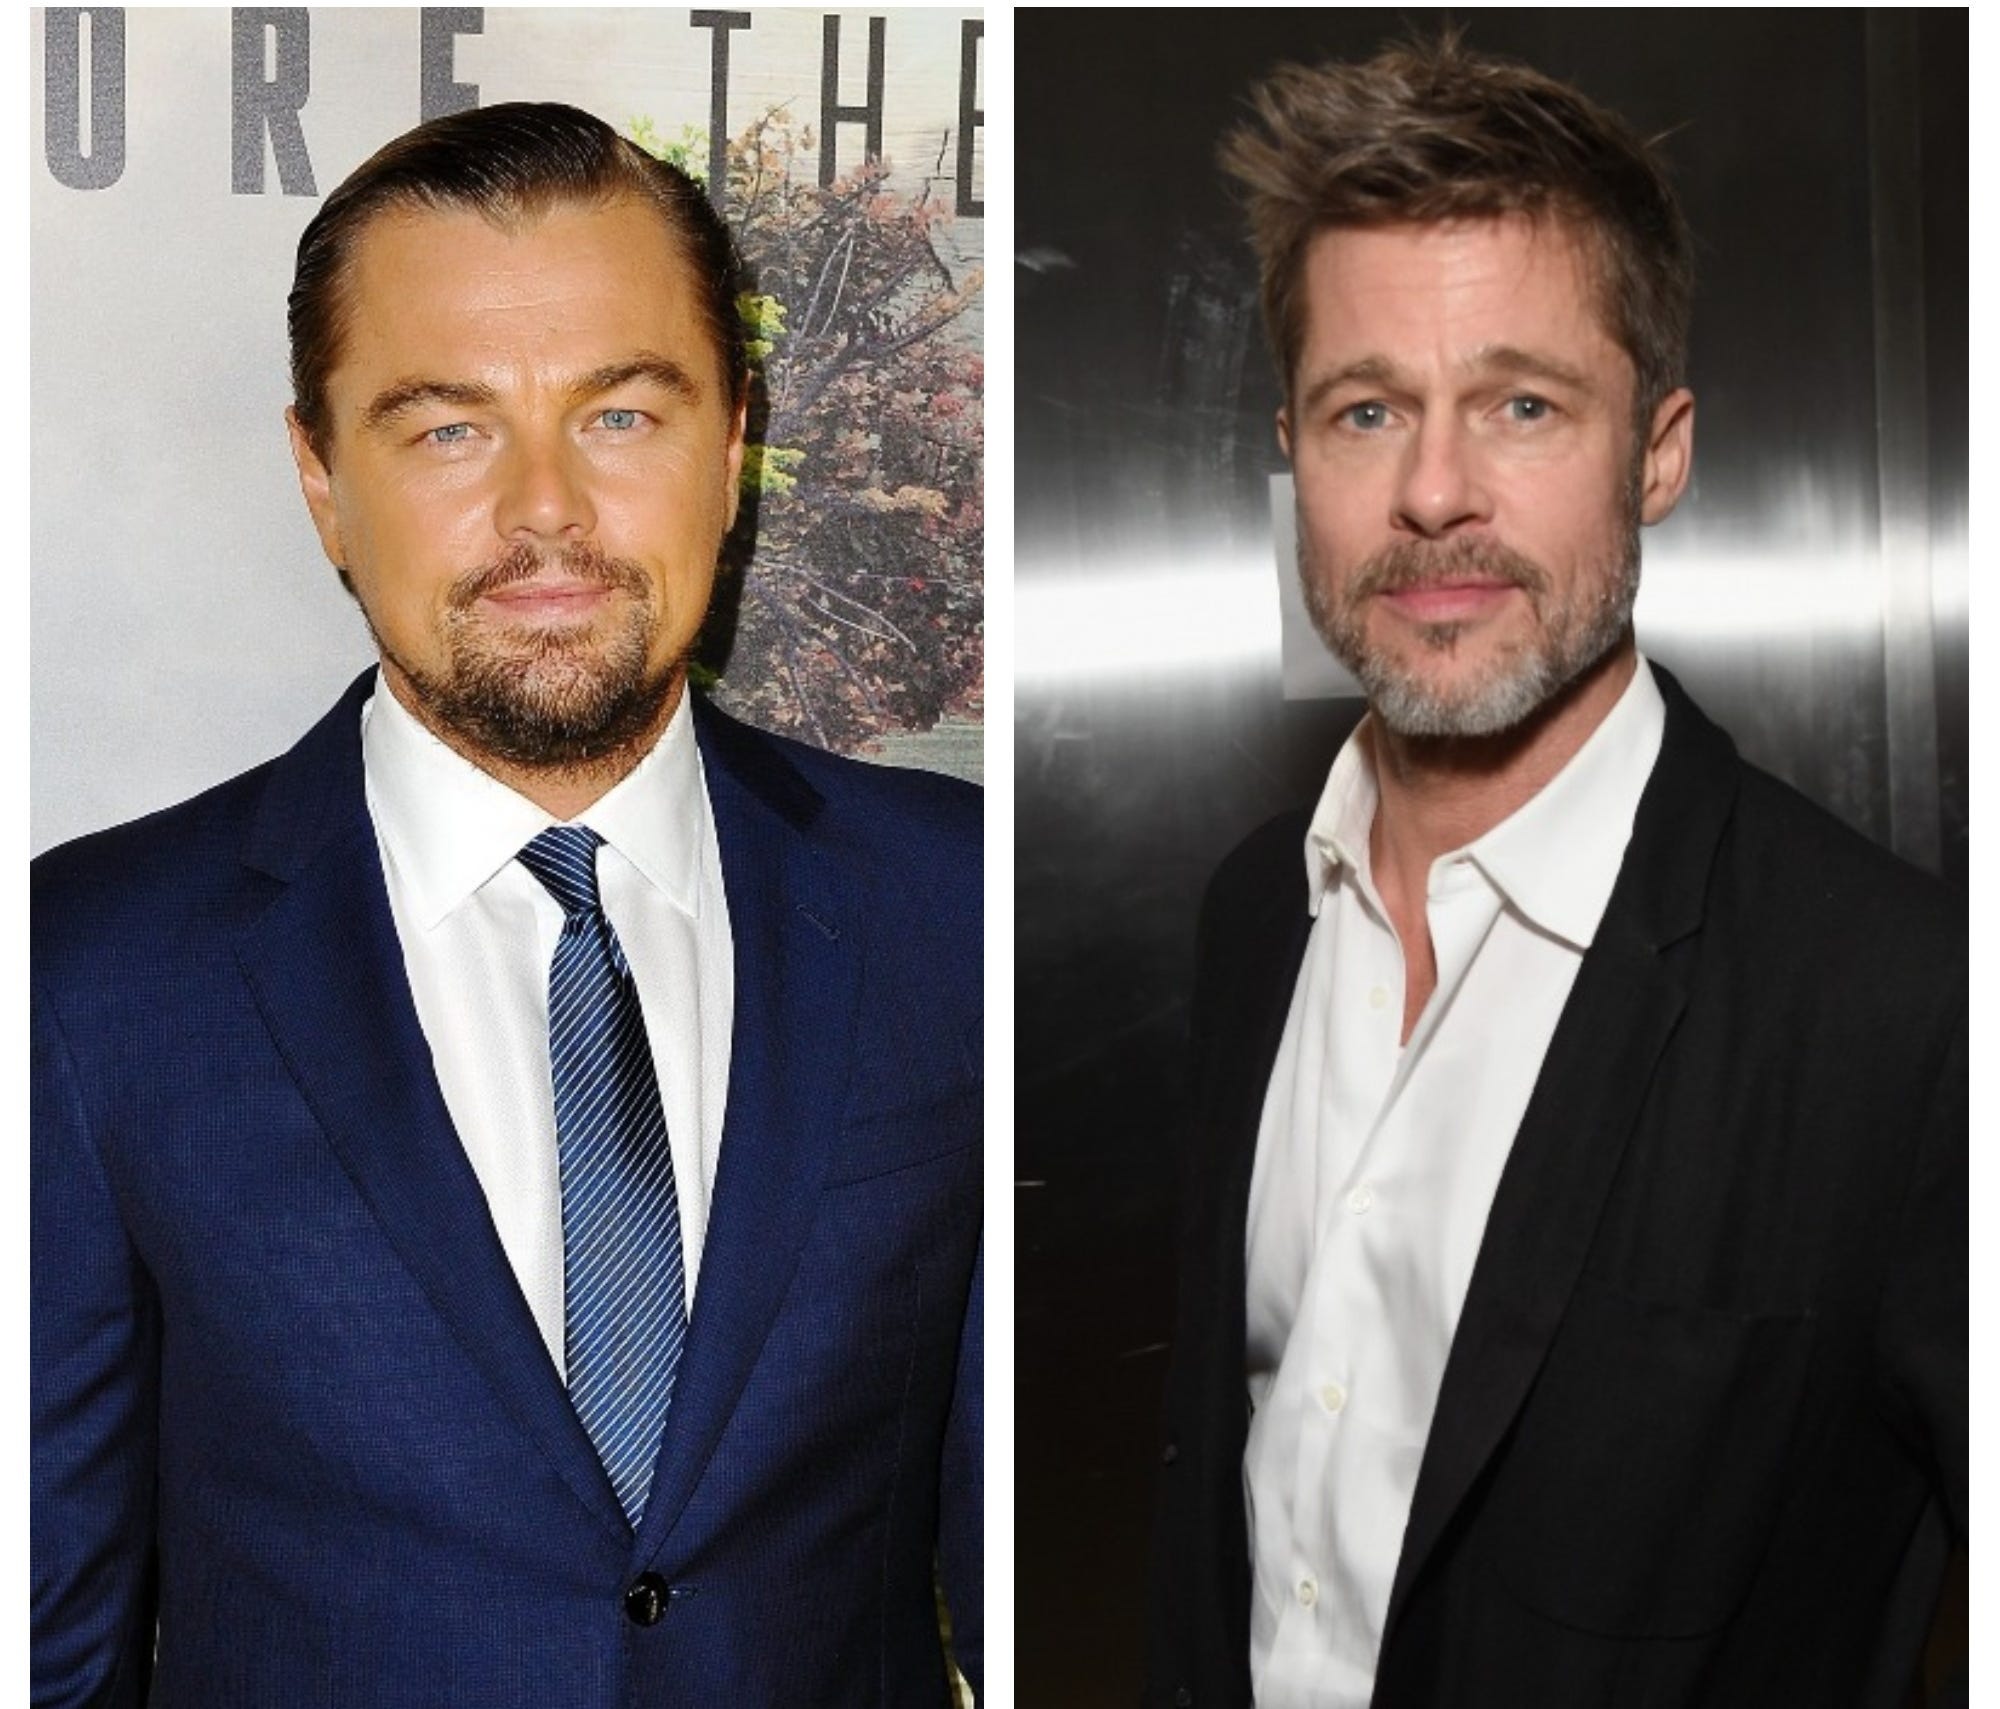 Leonardio DiCaprio and Brad Pitt will star in Quentin Tarantino's next film, 'Once Upon a Time in Hollywood.'